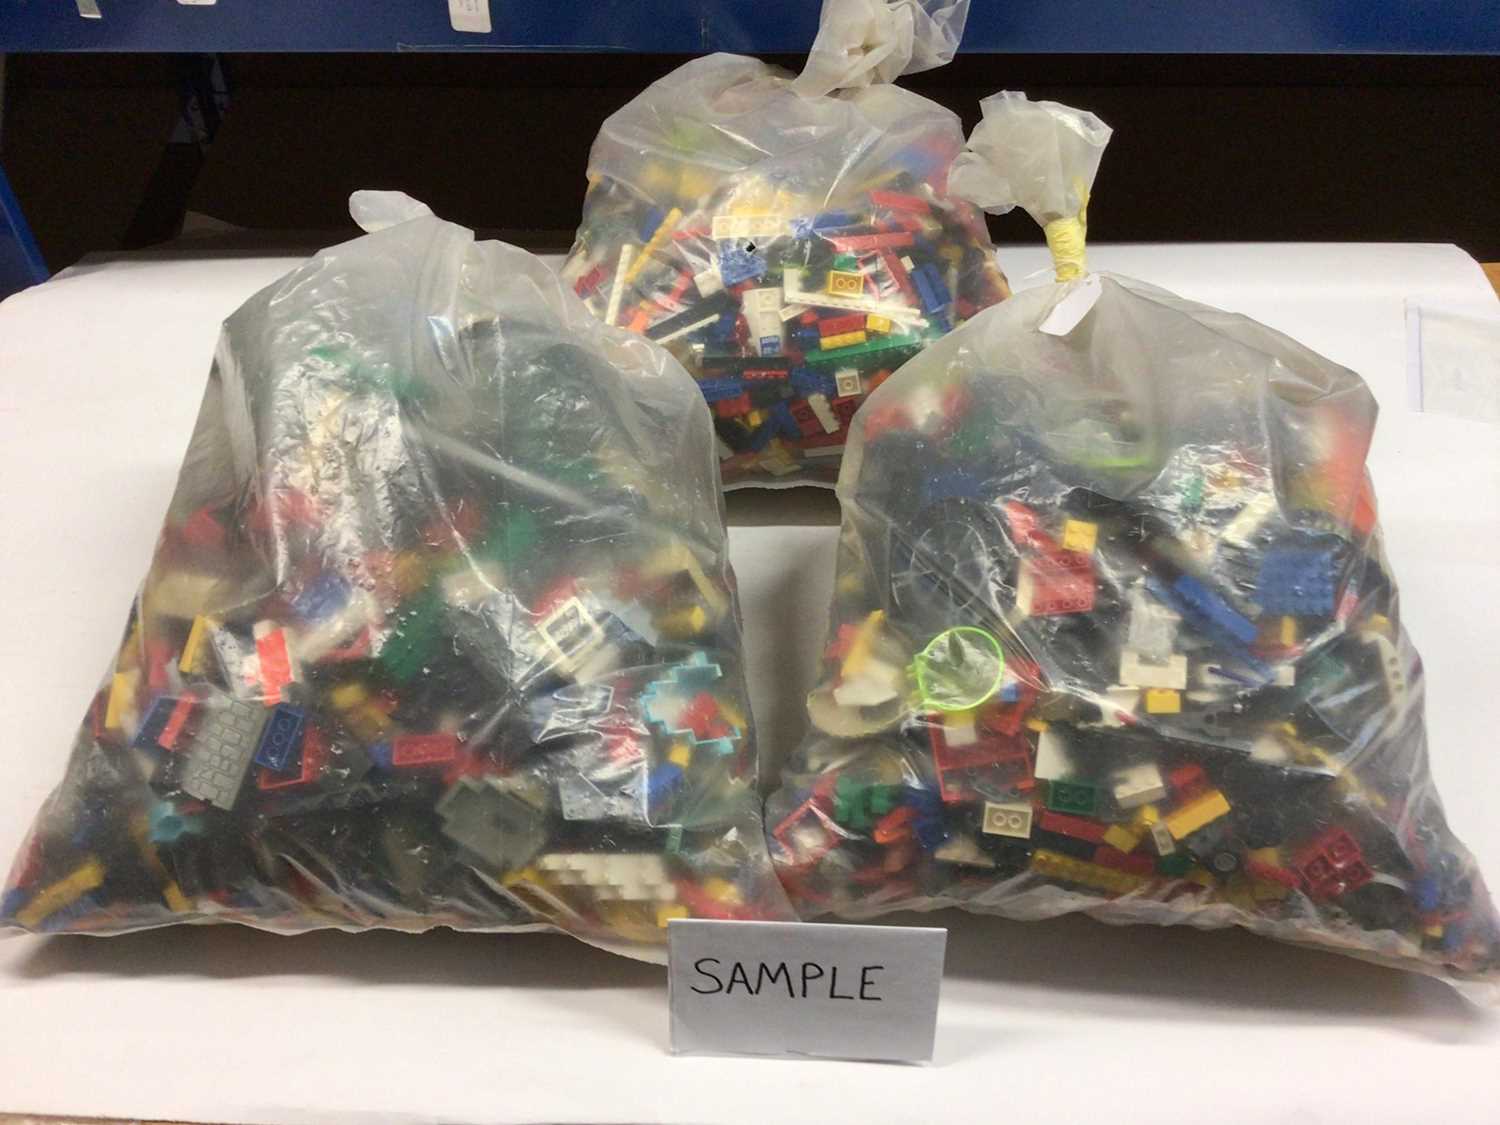 Lot 95 - Three bags of assorted mixed Lego bricks and accessories, weighing approx 15 Kg in total